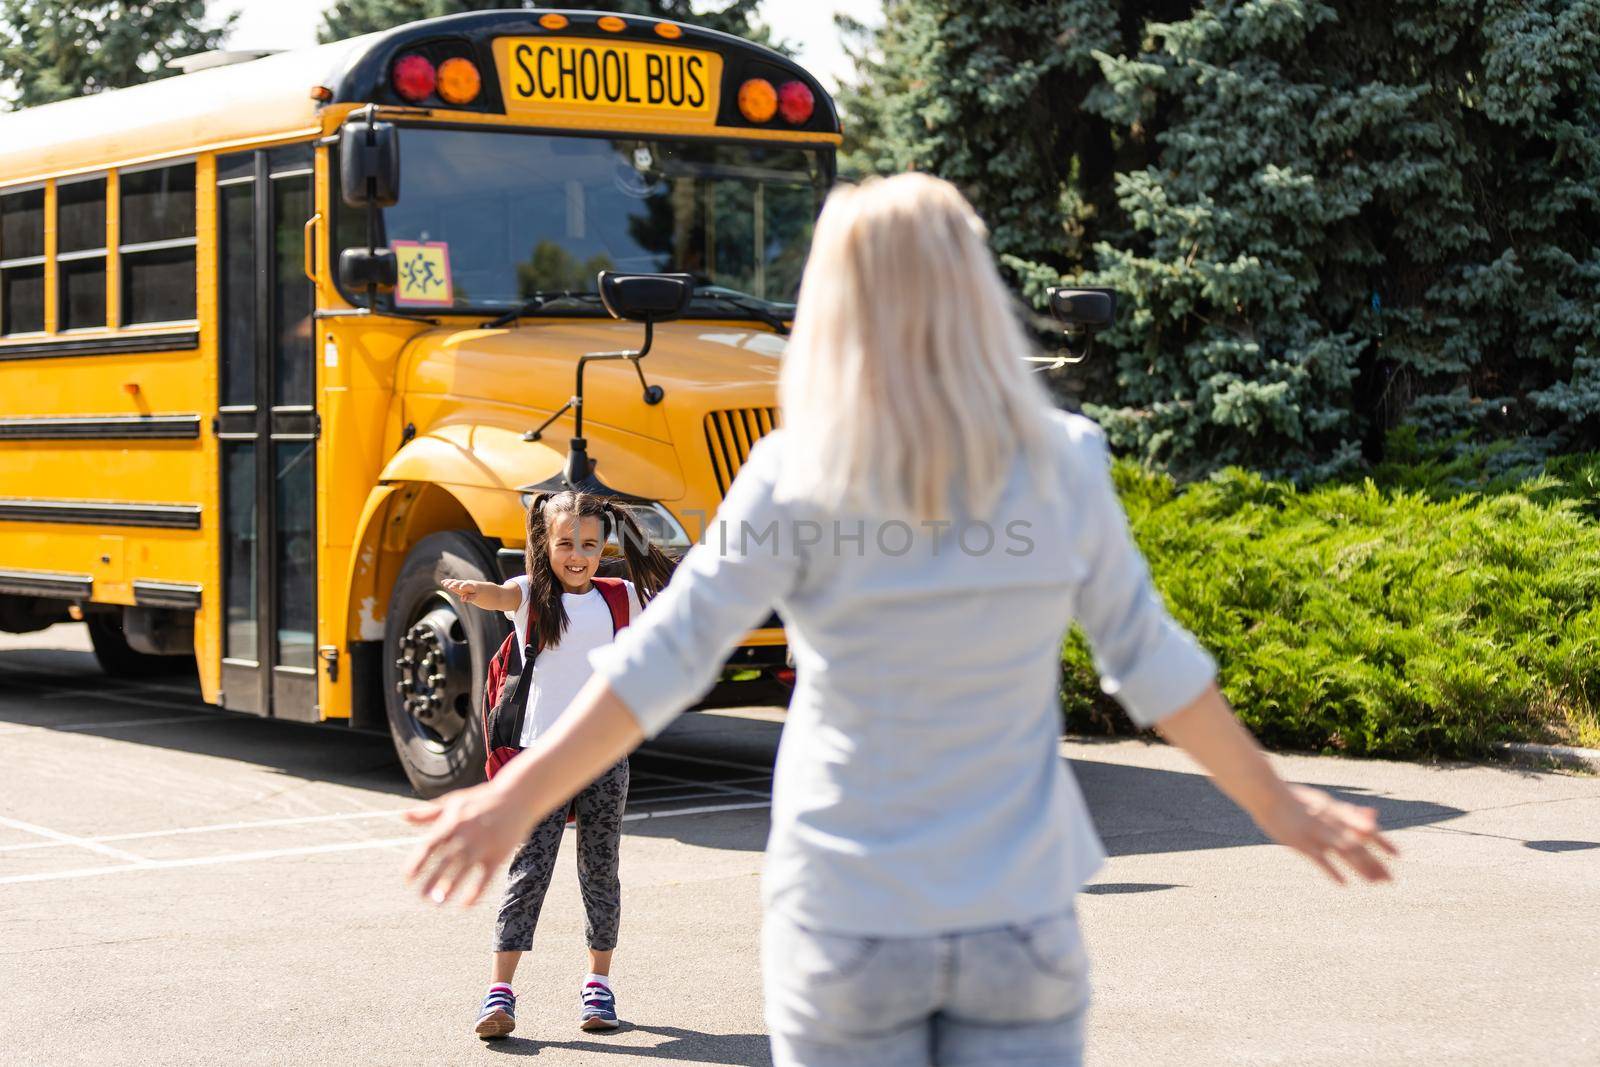 Kids student running into mother's hands to hug her after back to school near the school bus